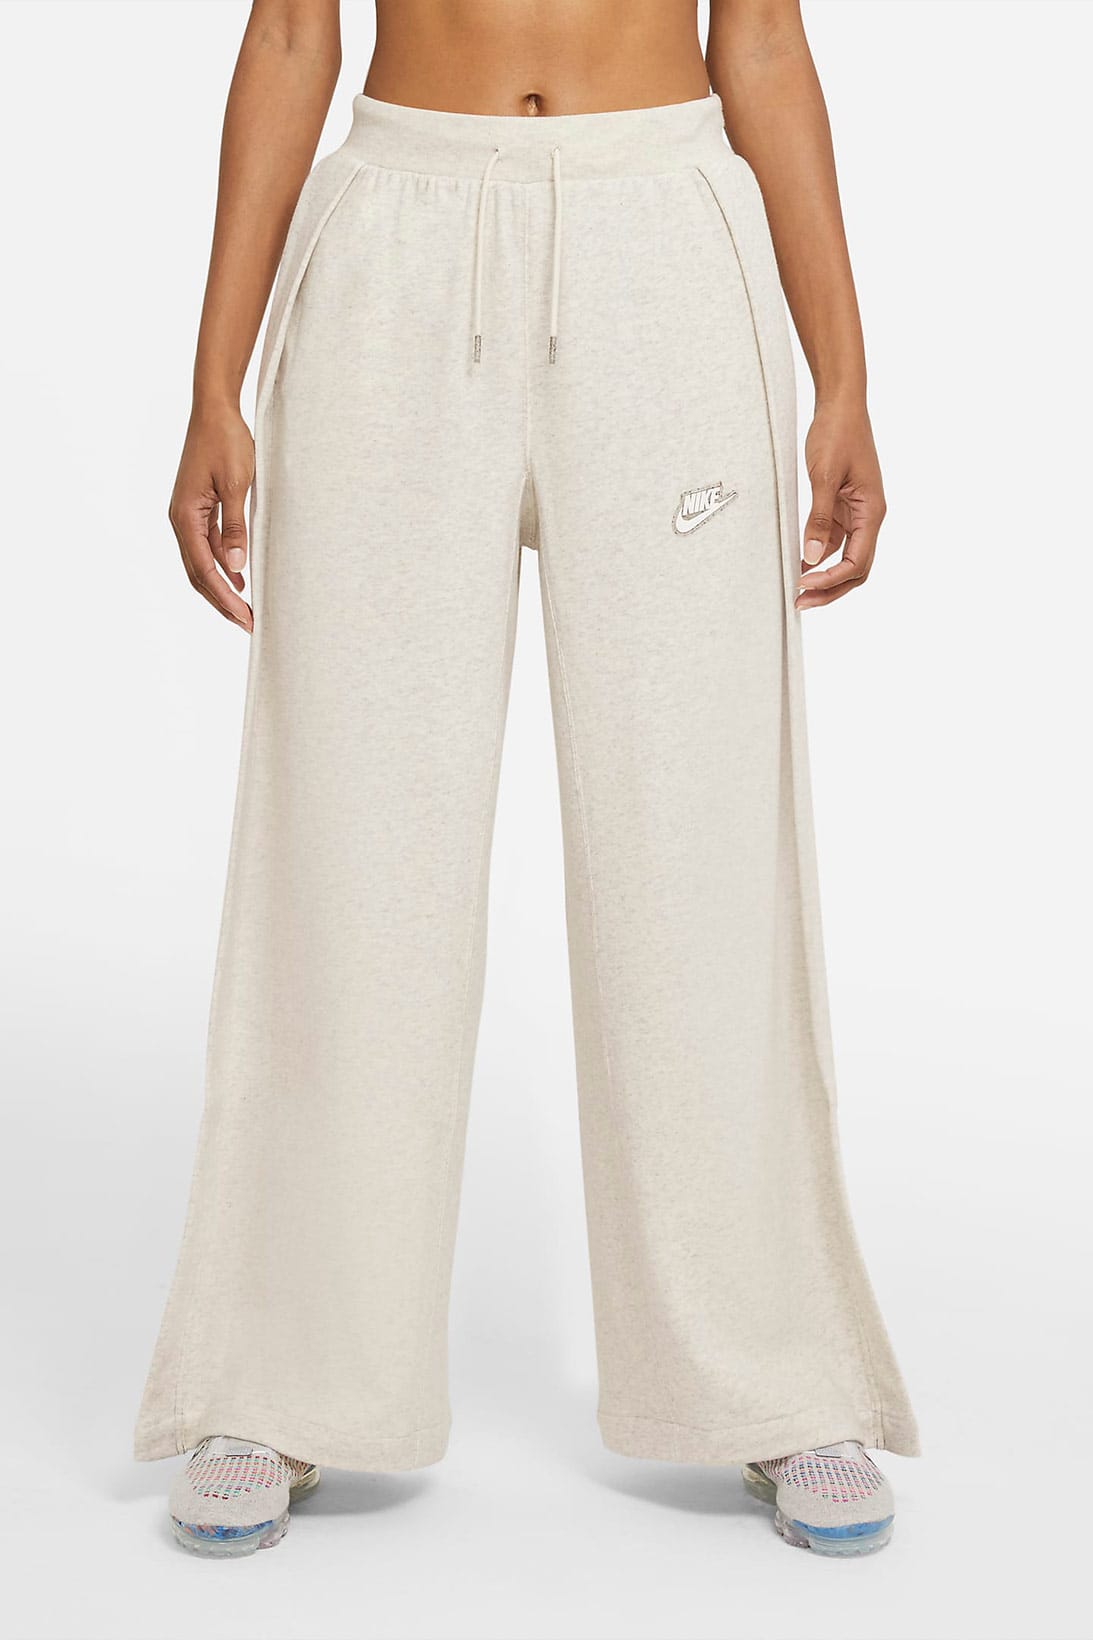 nike french terry sweatpants